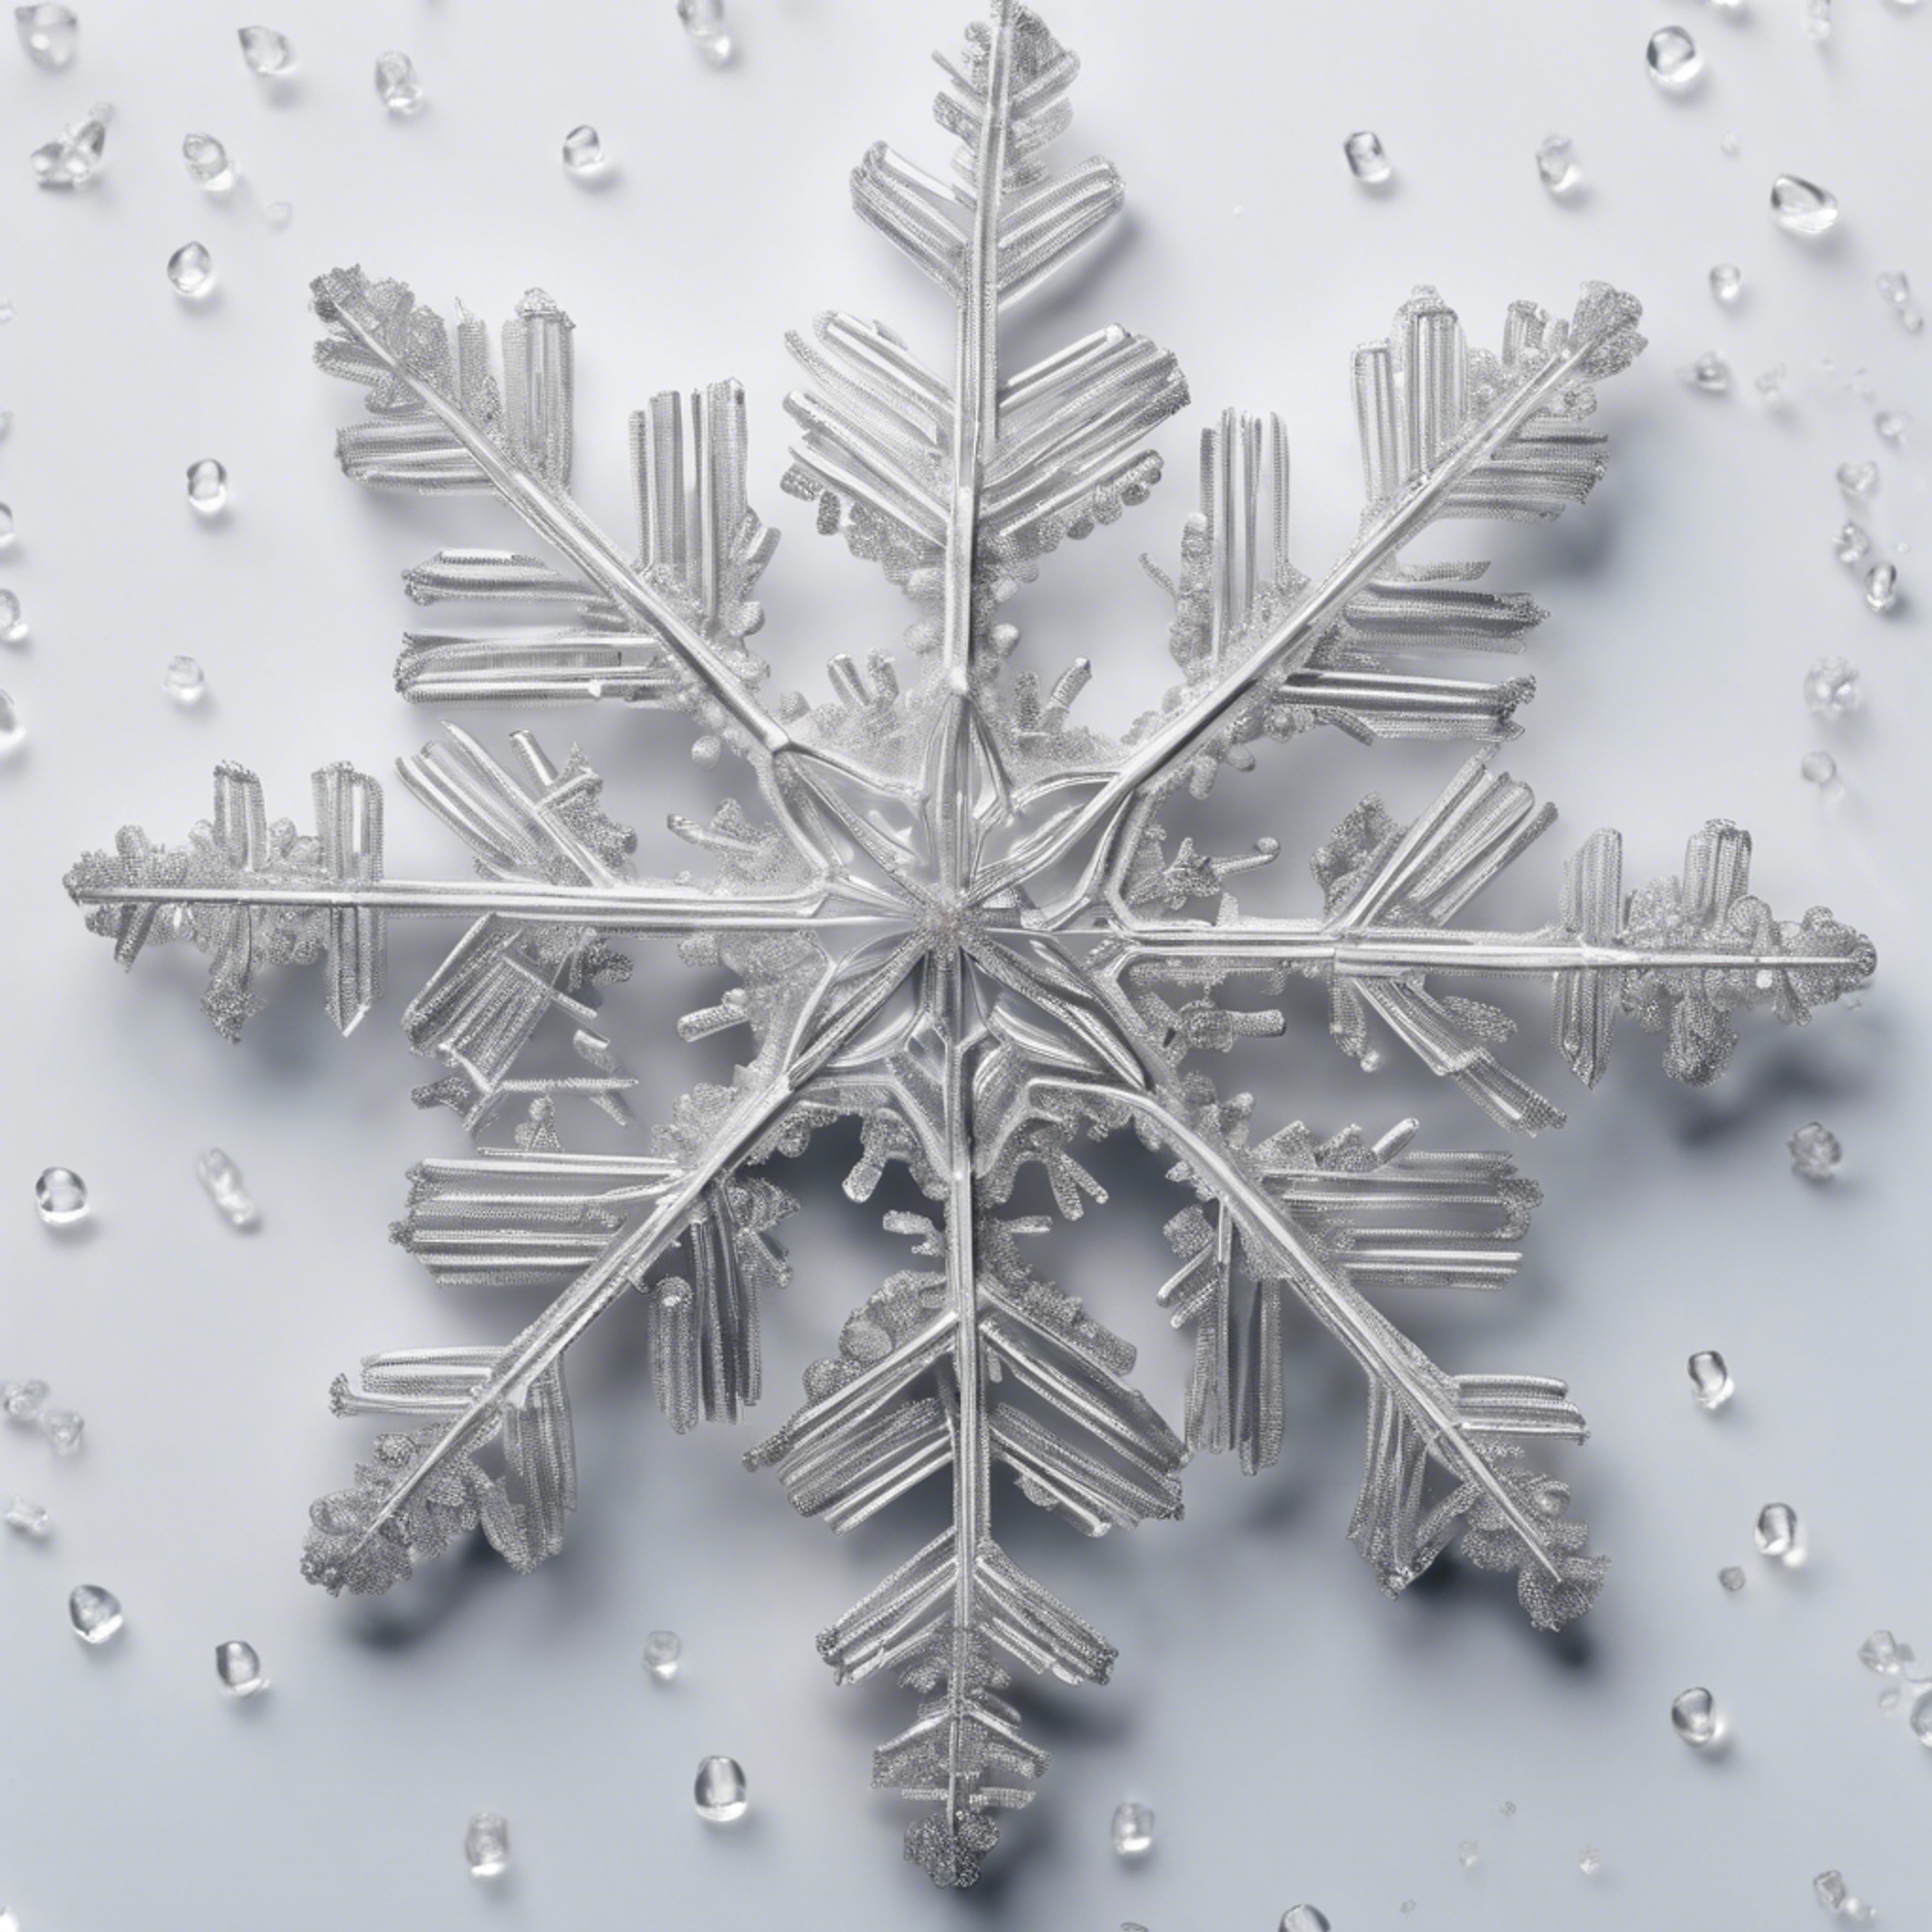 Close-up macro photography of a silver-white snowflake, intricate in detail, against a cool white background.壁紙[e4635791b5a244959ce4]